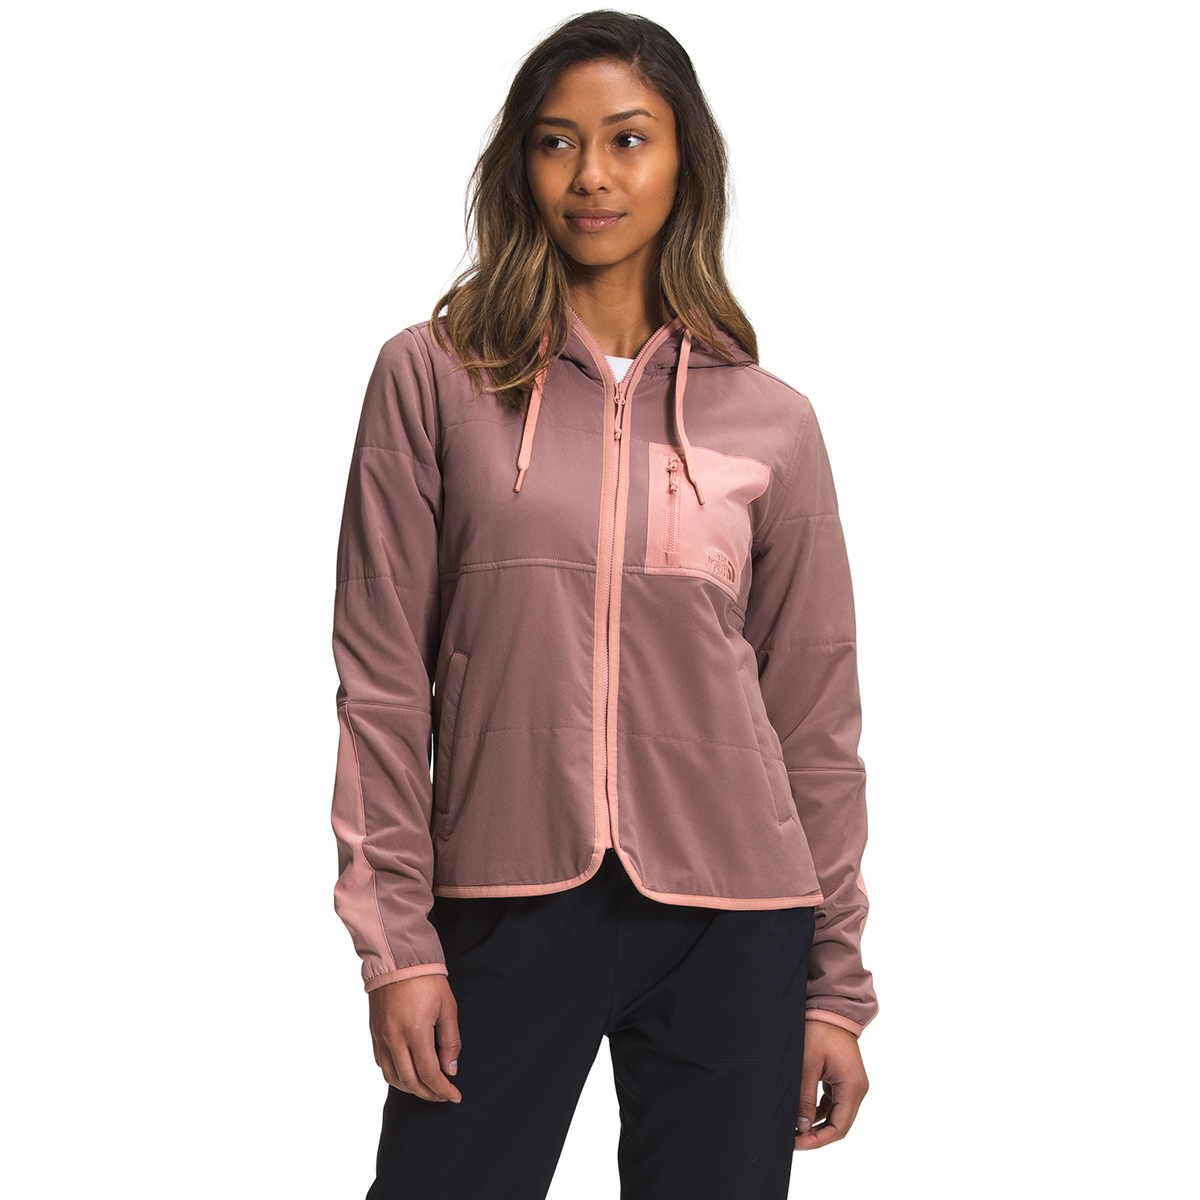 The North Face Women's Mountain Sweatshirt Hoodie - Size L